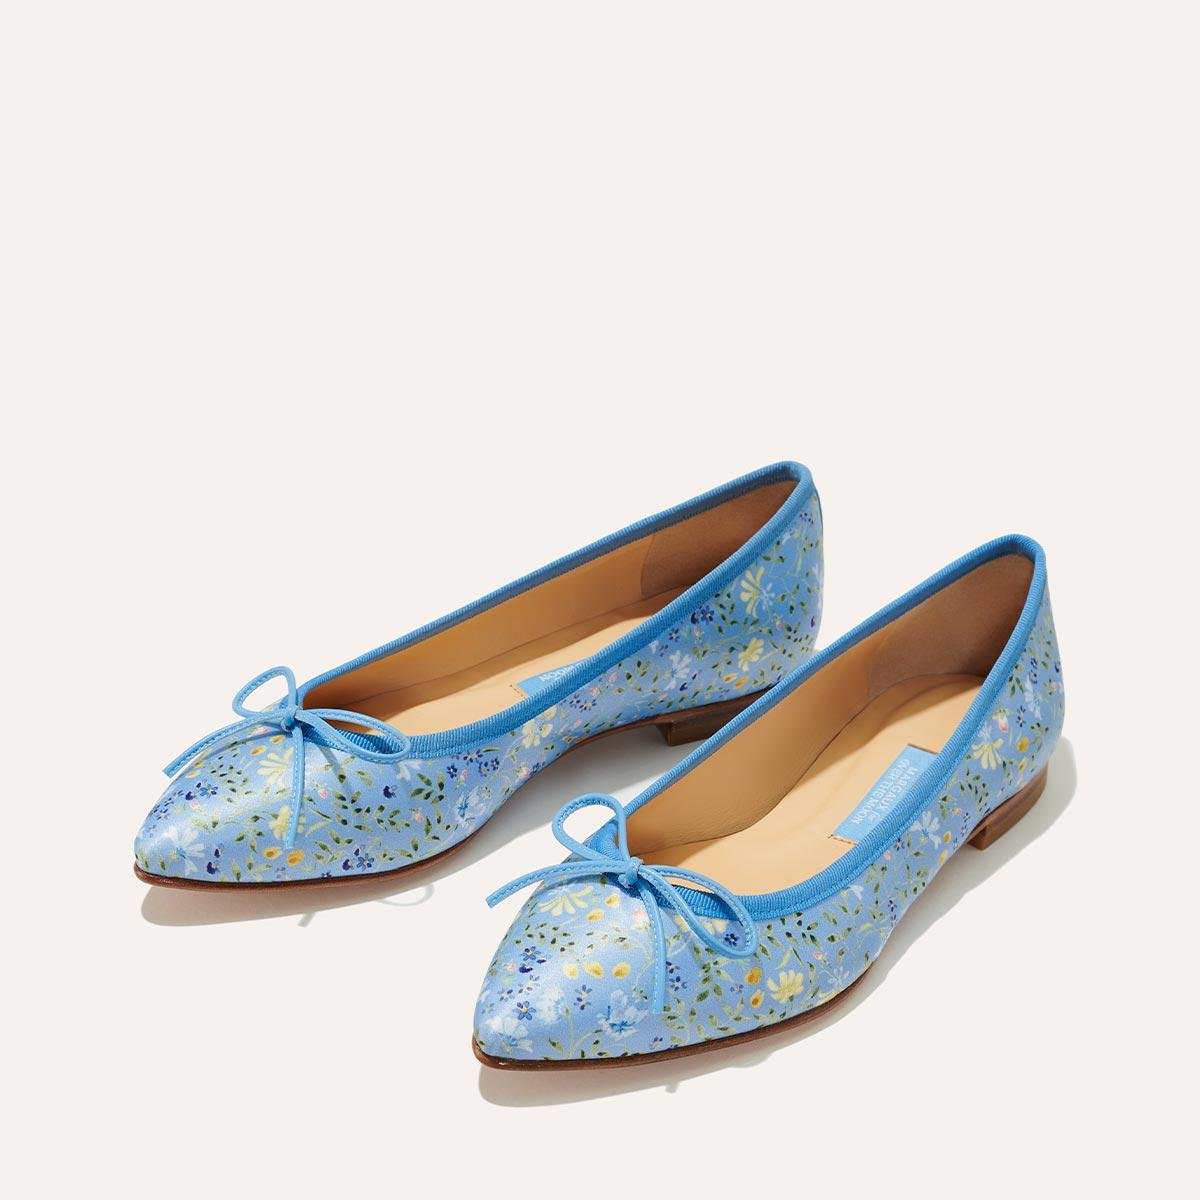 The Pointe - Blue Floral Satin by MARGAUX